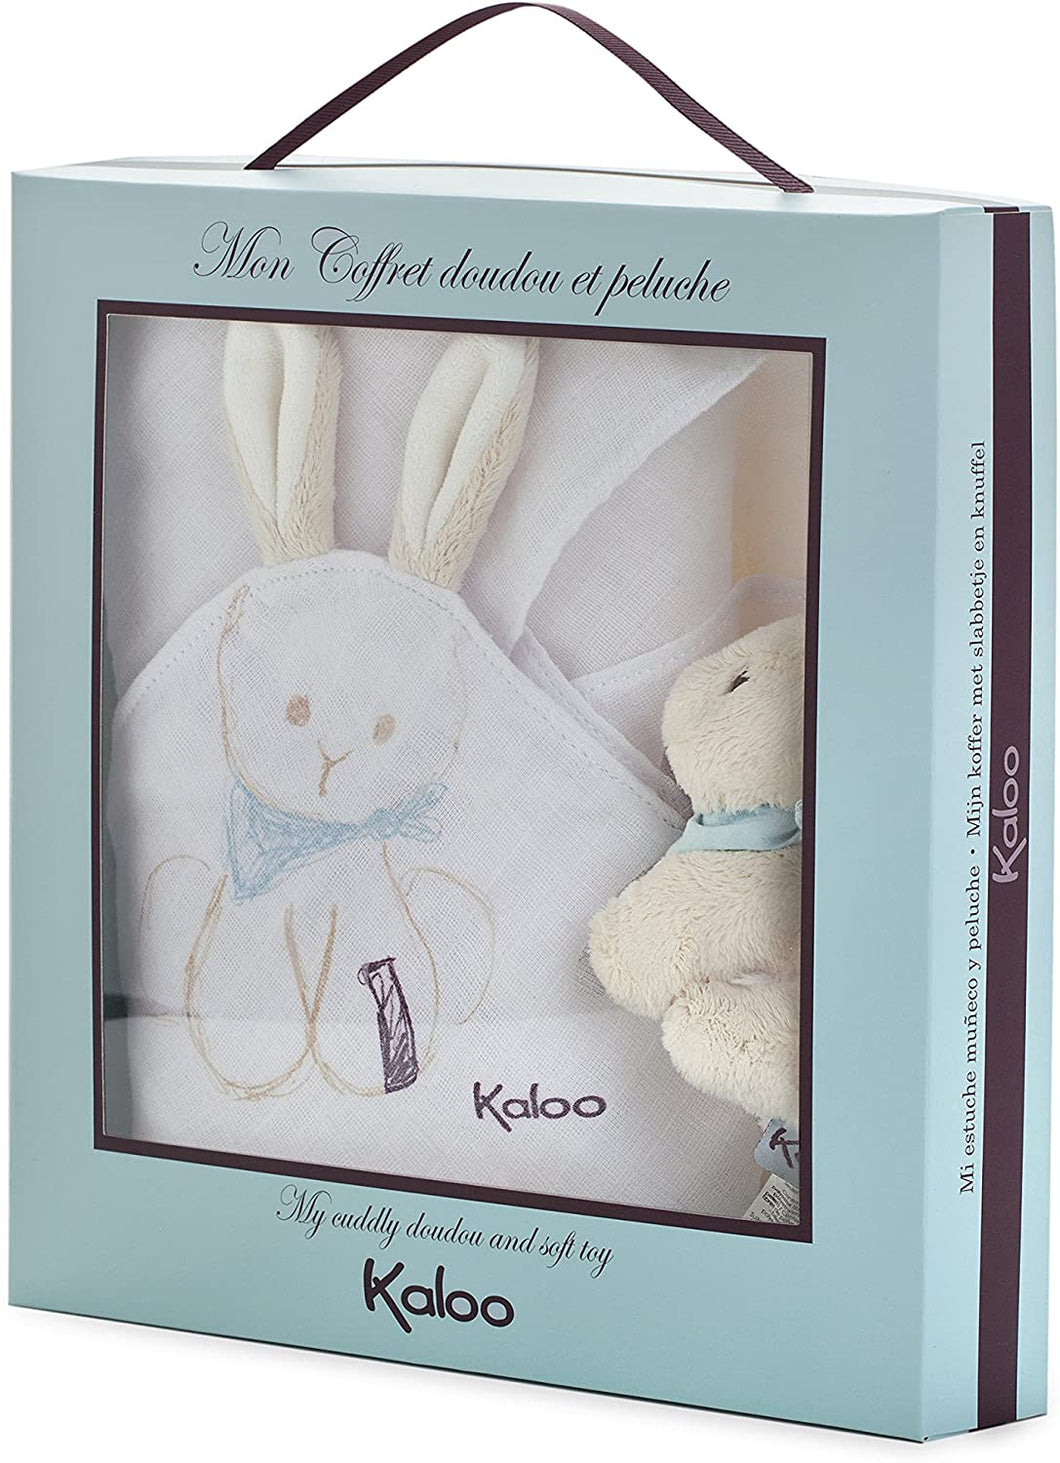 Praline Rabbit Receiving Cuddle Blanket and stuffie - set of 2 Personalized